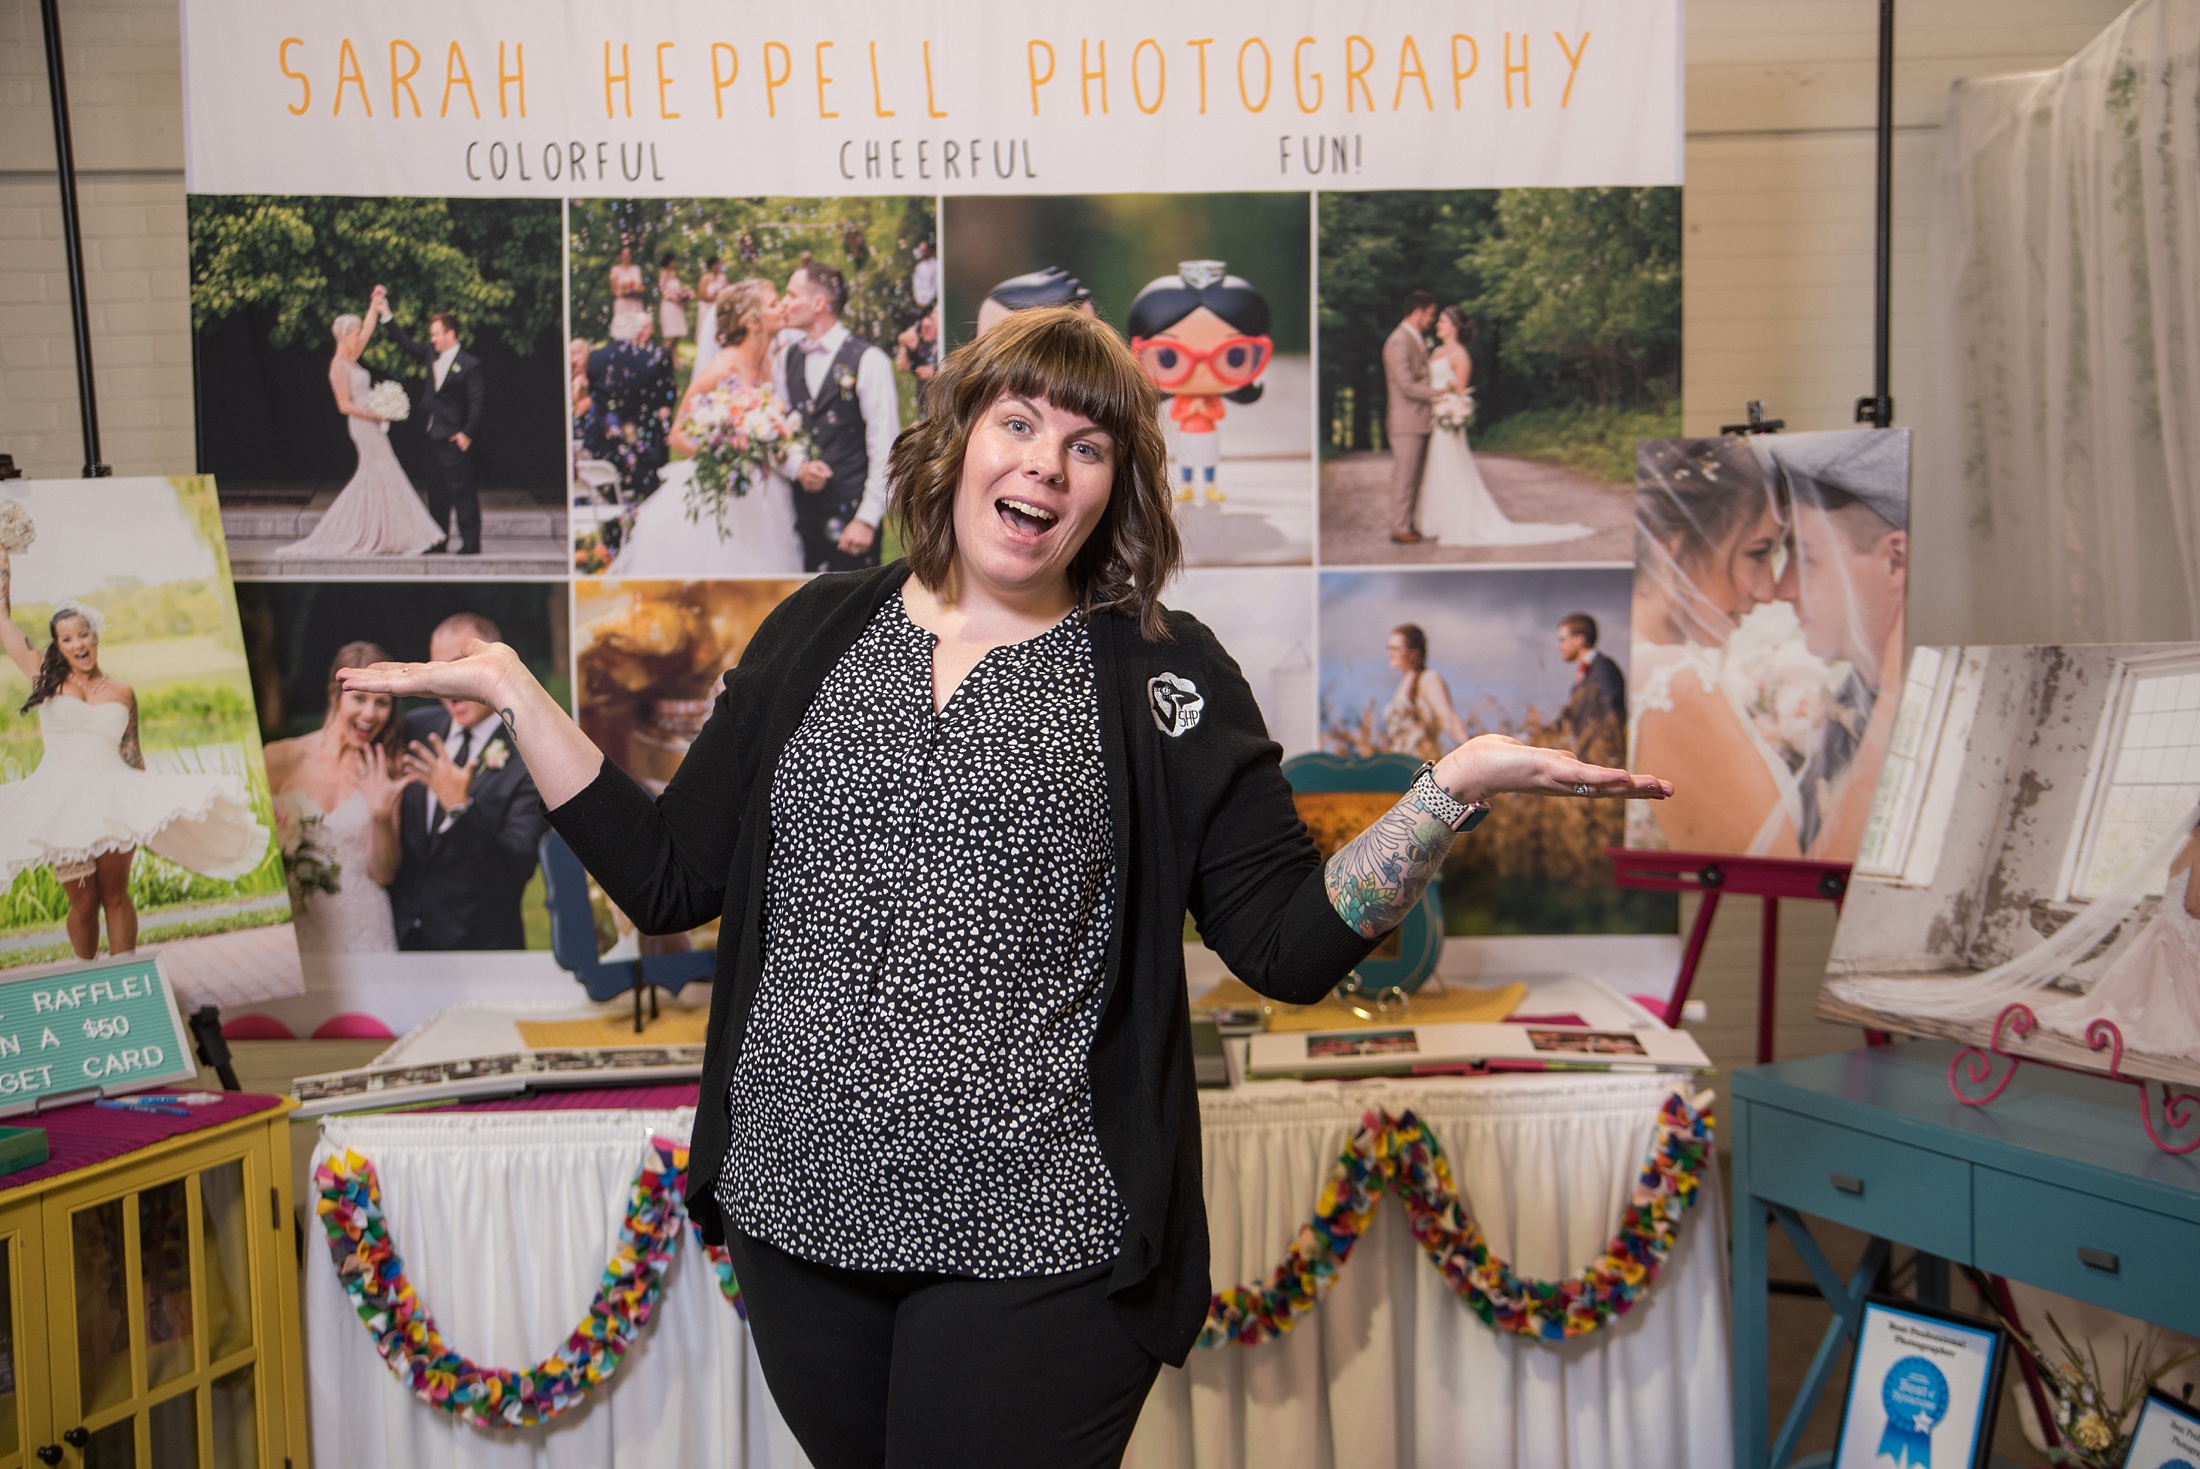 sarah heppell at her bridal show booth, syracuse ny bridal show, sarah heppell photography, wedding photographer